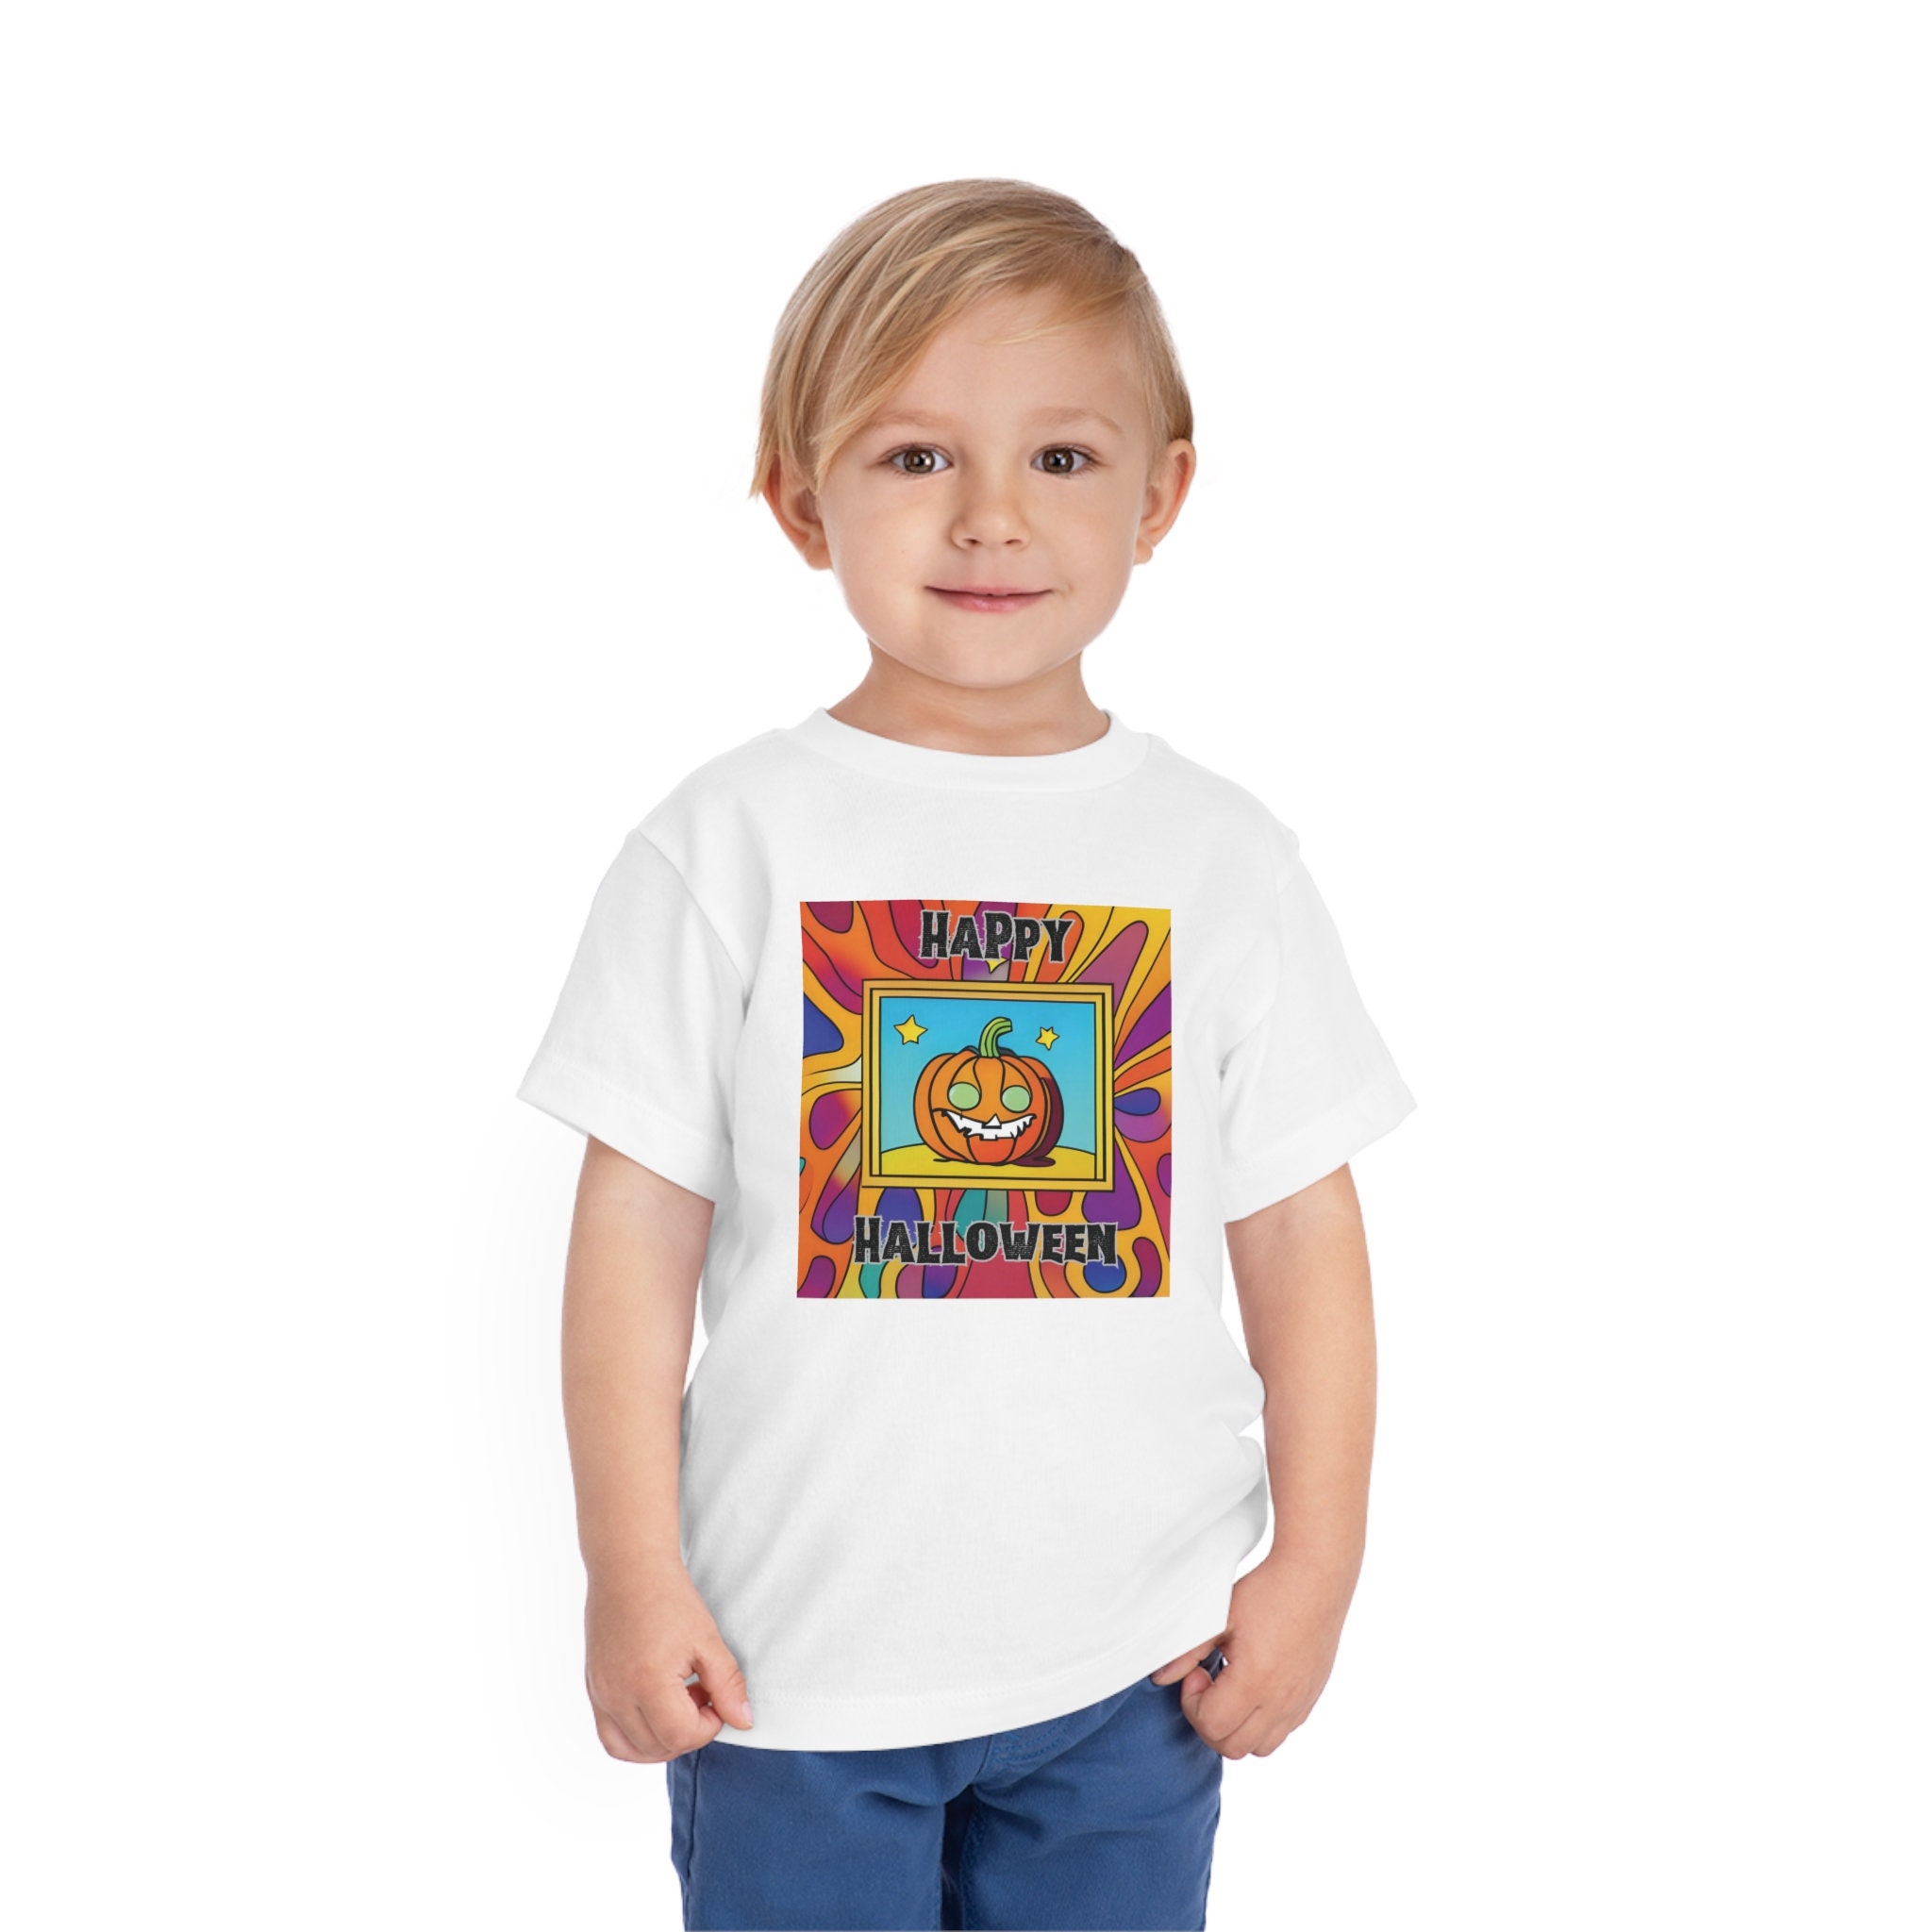 Discover Toddler T-Shirt Short Sleeve T Shirt  Sizes 2T - 5T Gift for Her Gift for Him Gift for Niece Gift for Nephew Happy Halloween Pumpkin Fun